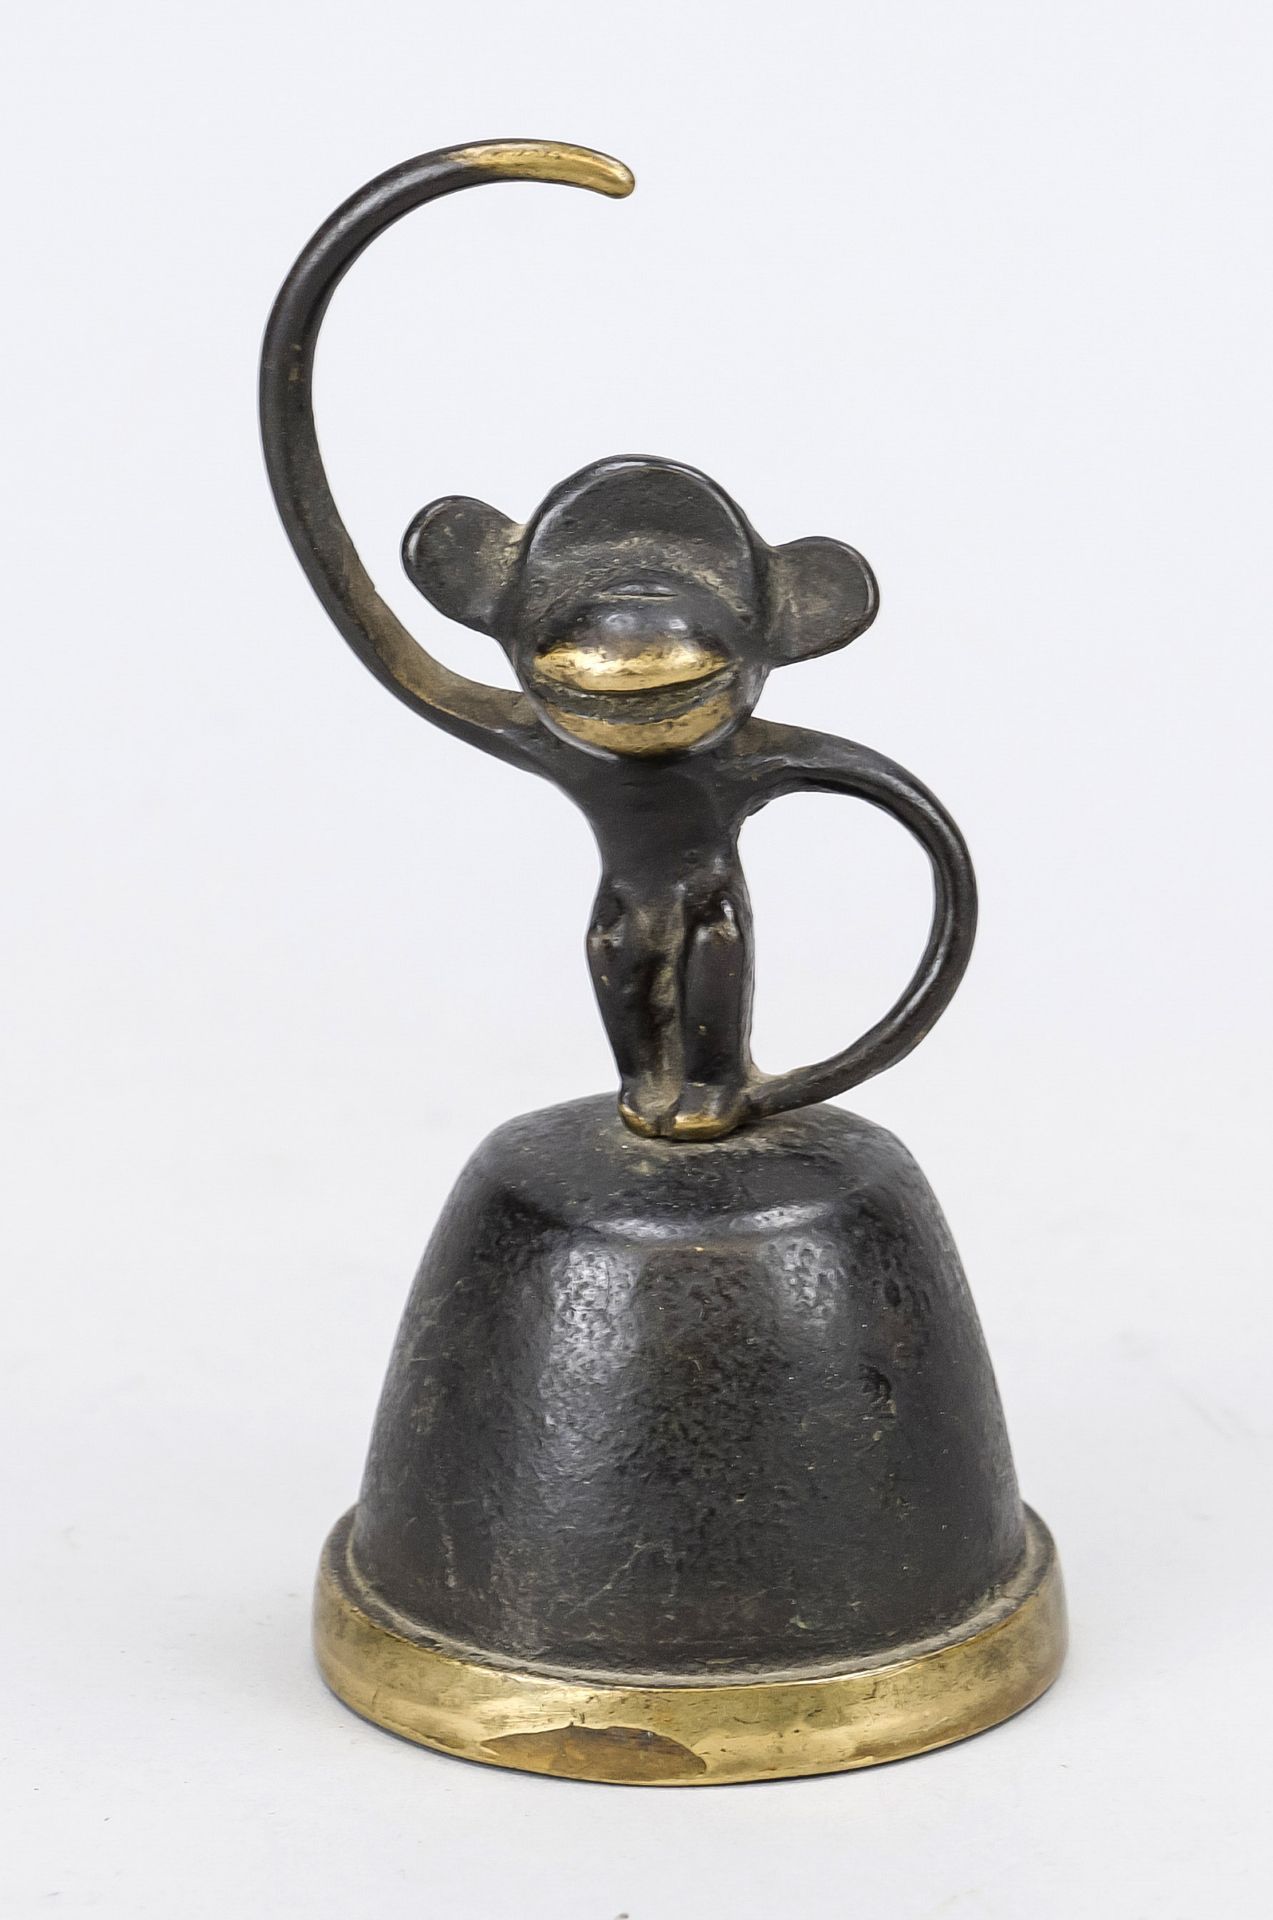 Table bell with monkey as handle, Walter Bosse 1960s, dark patinated bronze, rubbed, h. 14 cm